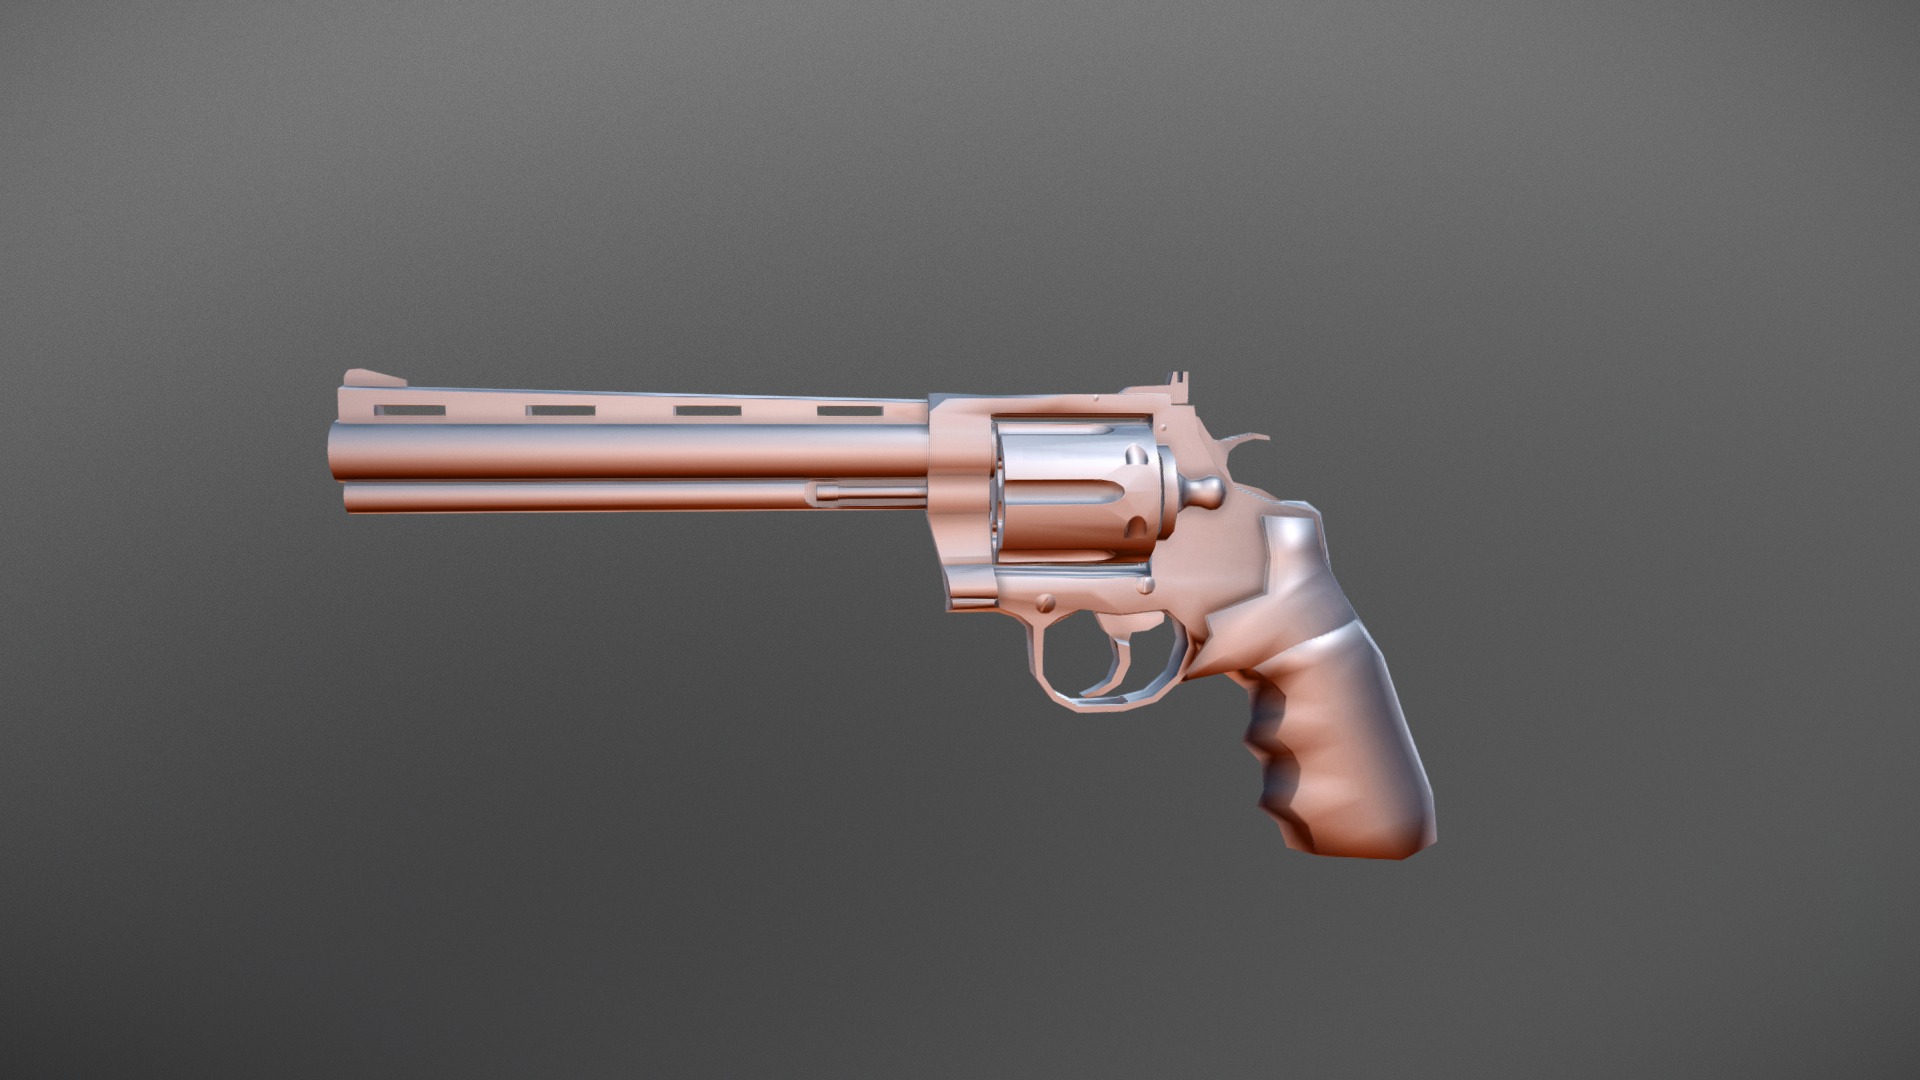 3D model Colt Anaconda Revolver [Firearms] - This is a 3D model of the Colt Anaconda Revolver [Firearms]. The 3D model is about a hand holding a gun.